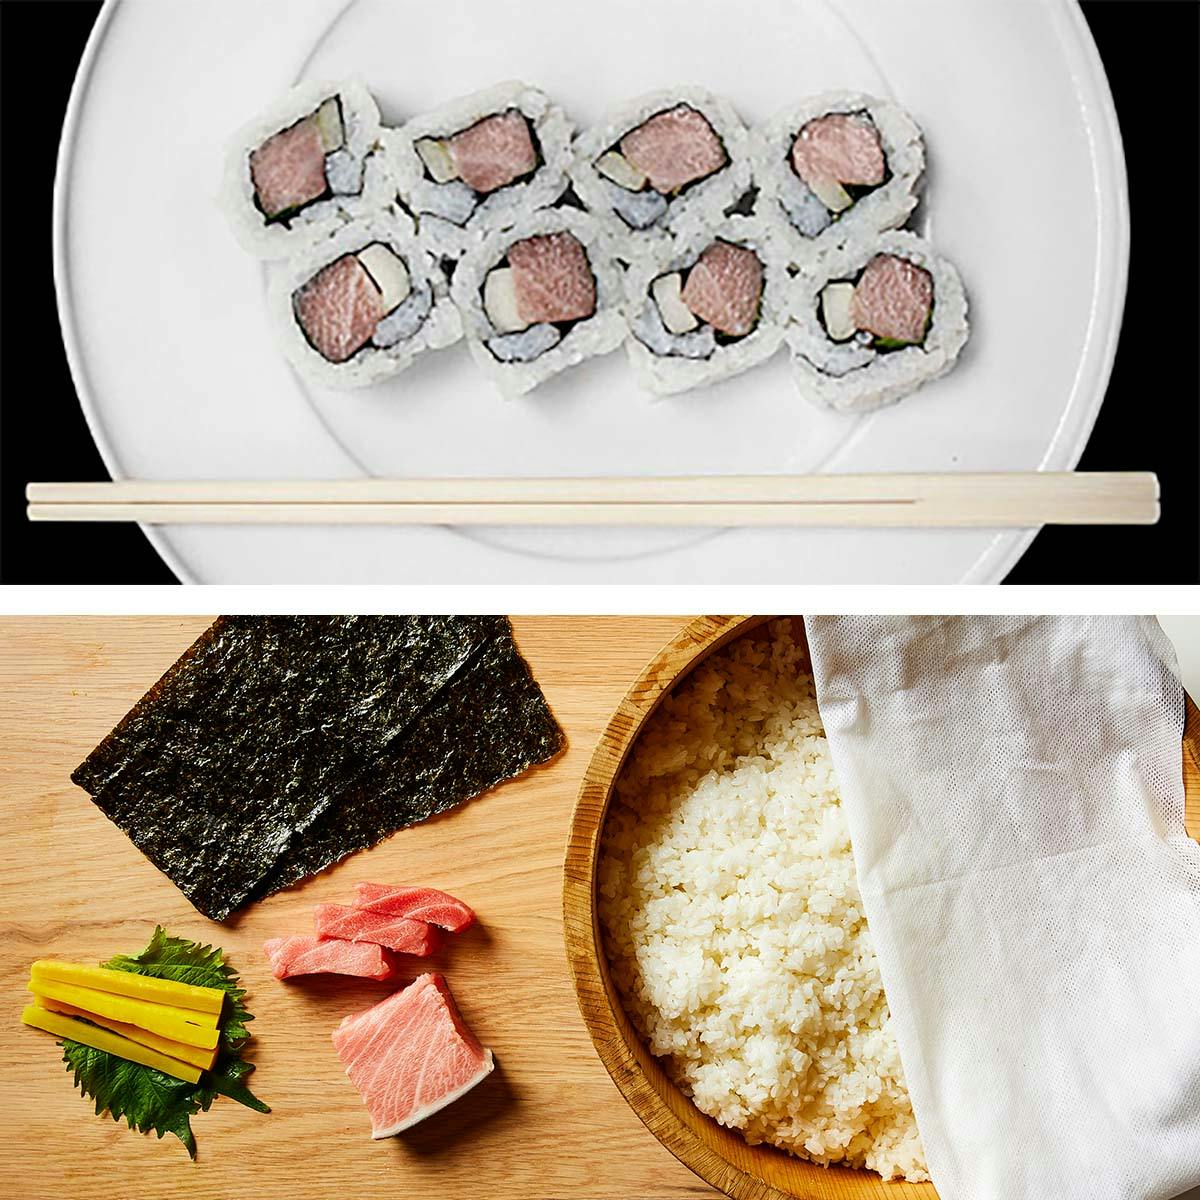 Where To Buy A Quality Sushi Kit